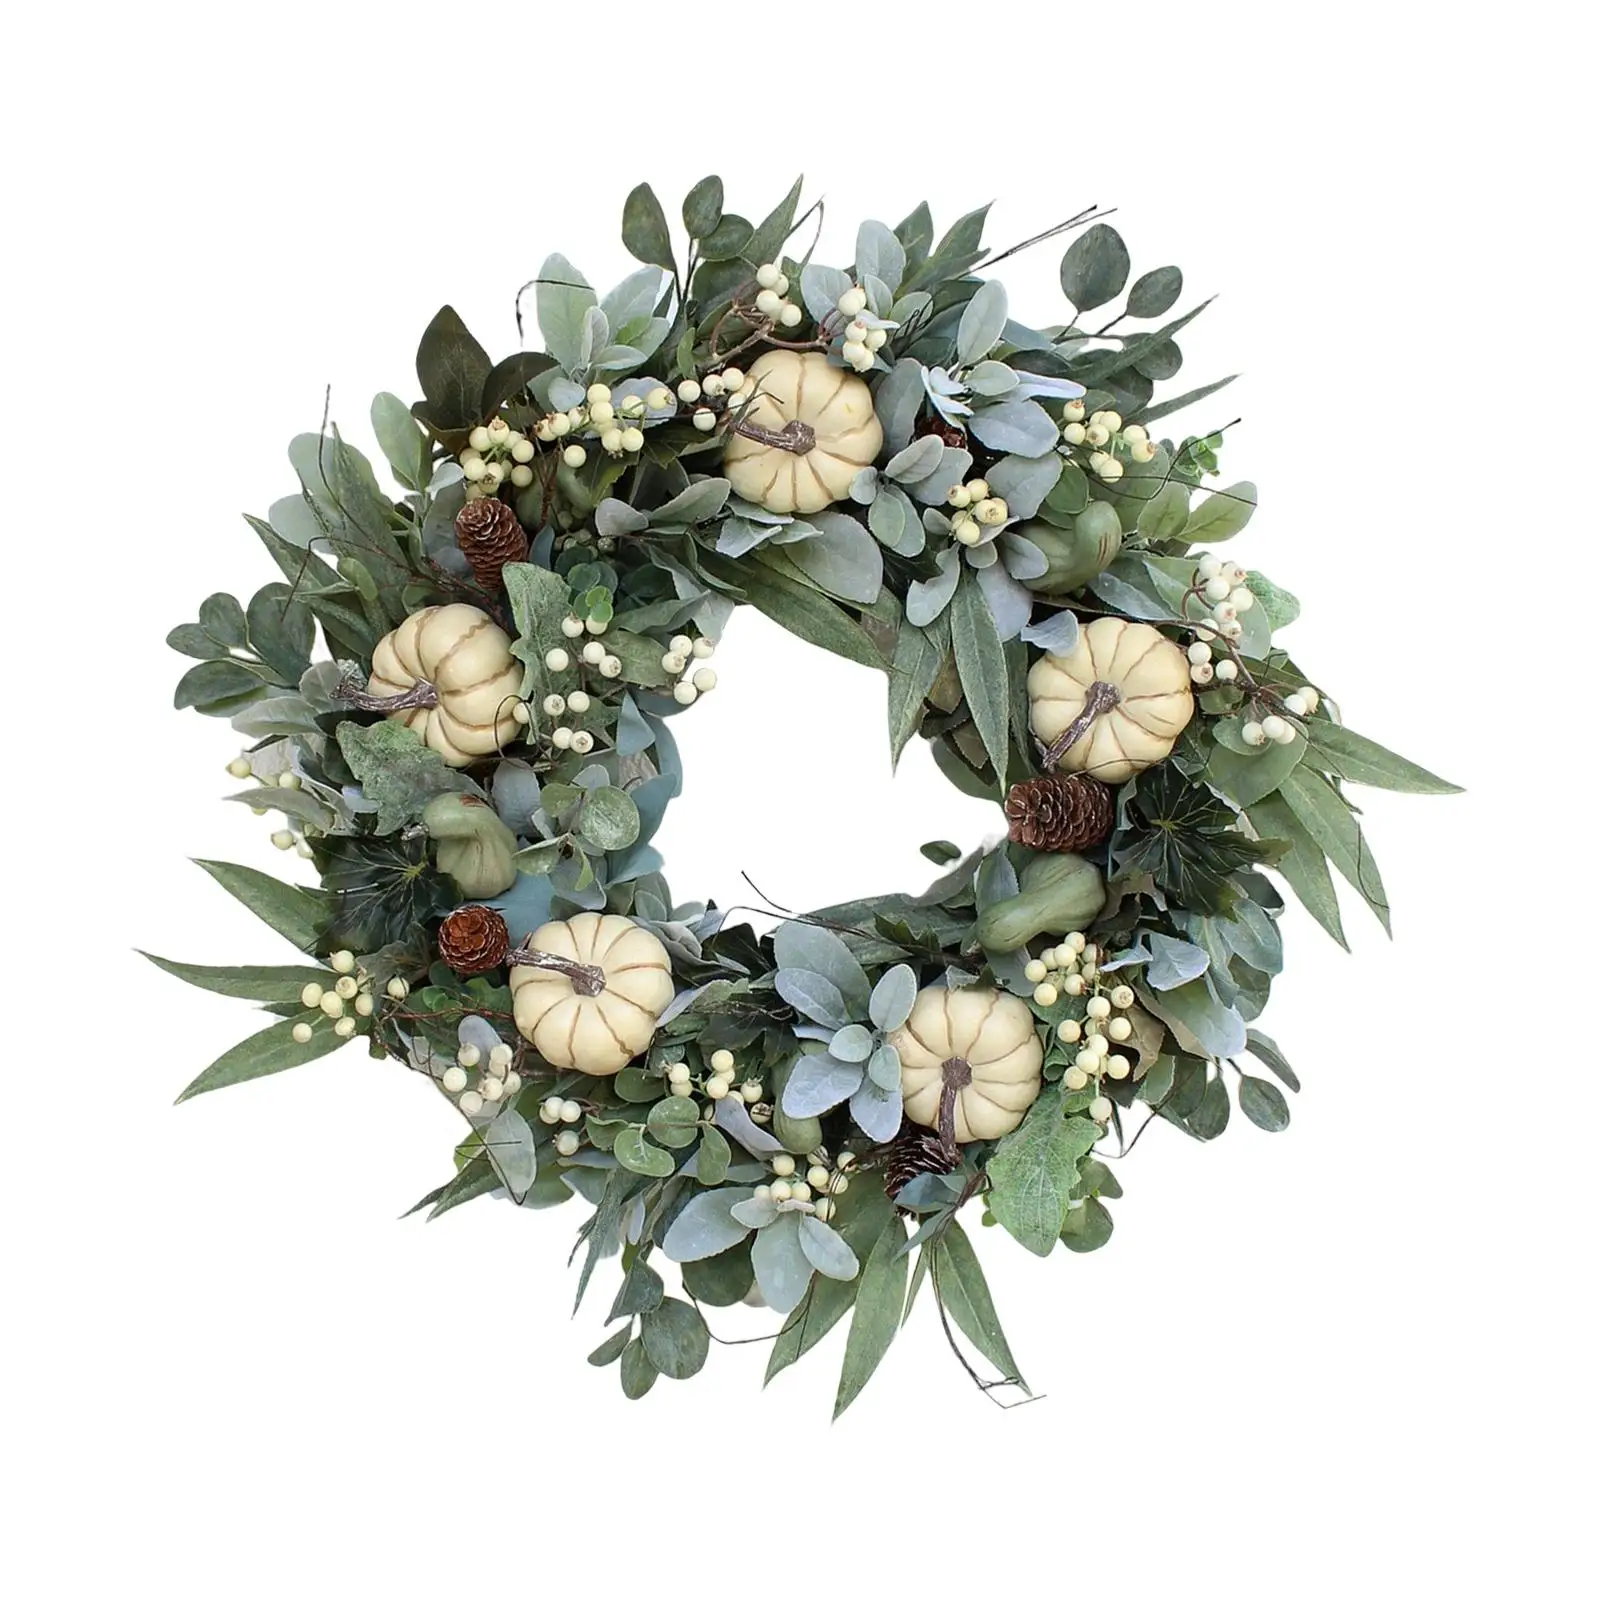 16 inch Artificial Pumpkins Autumn Wreath Hanging with Green